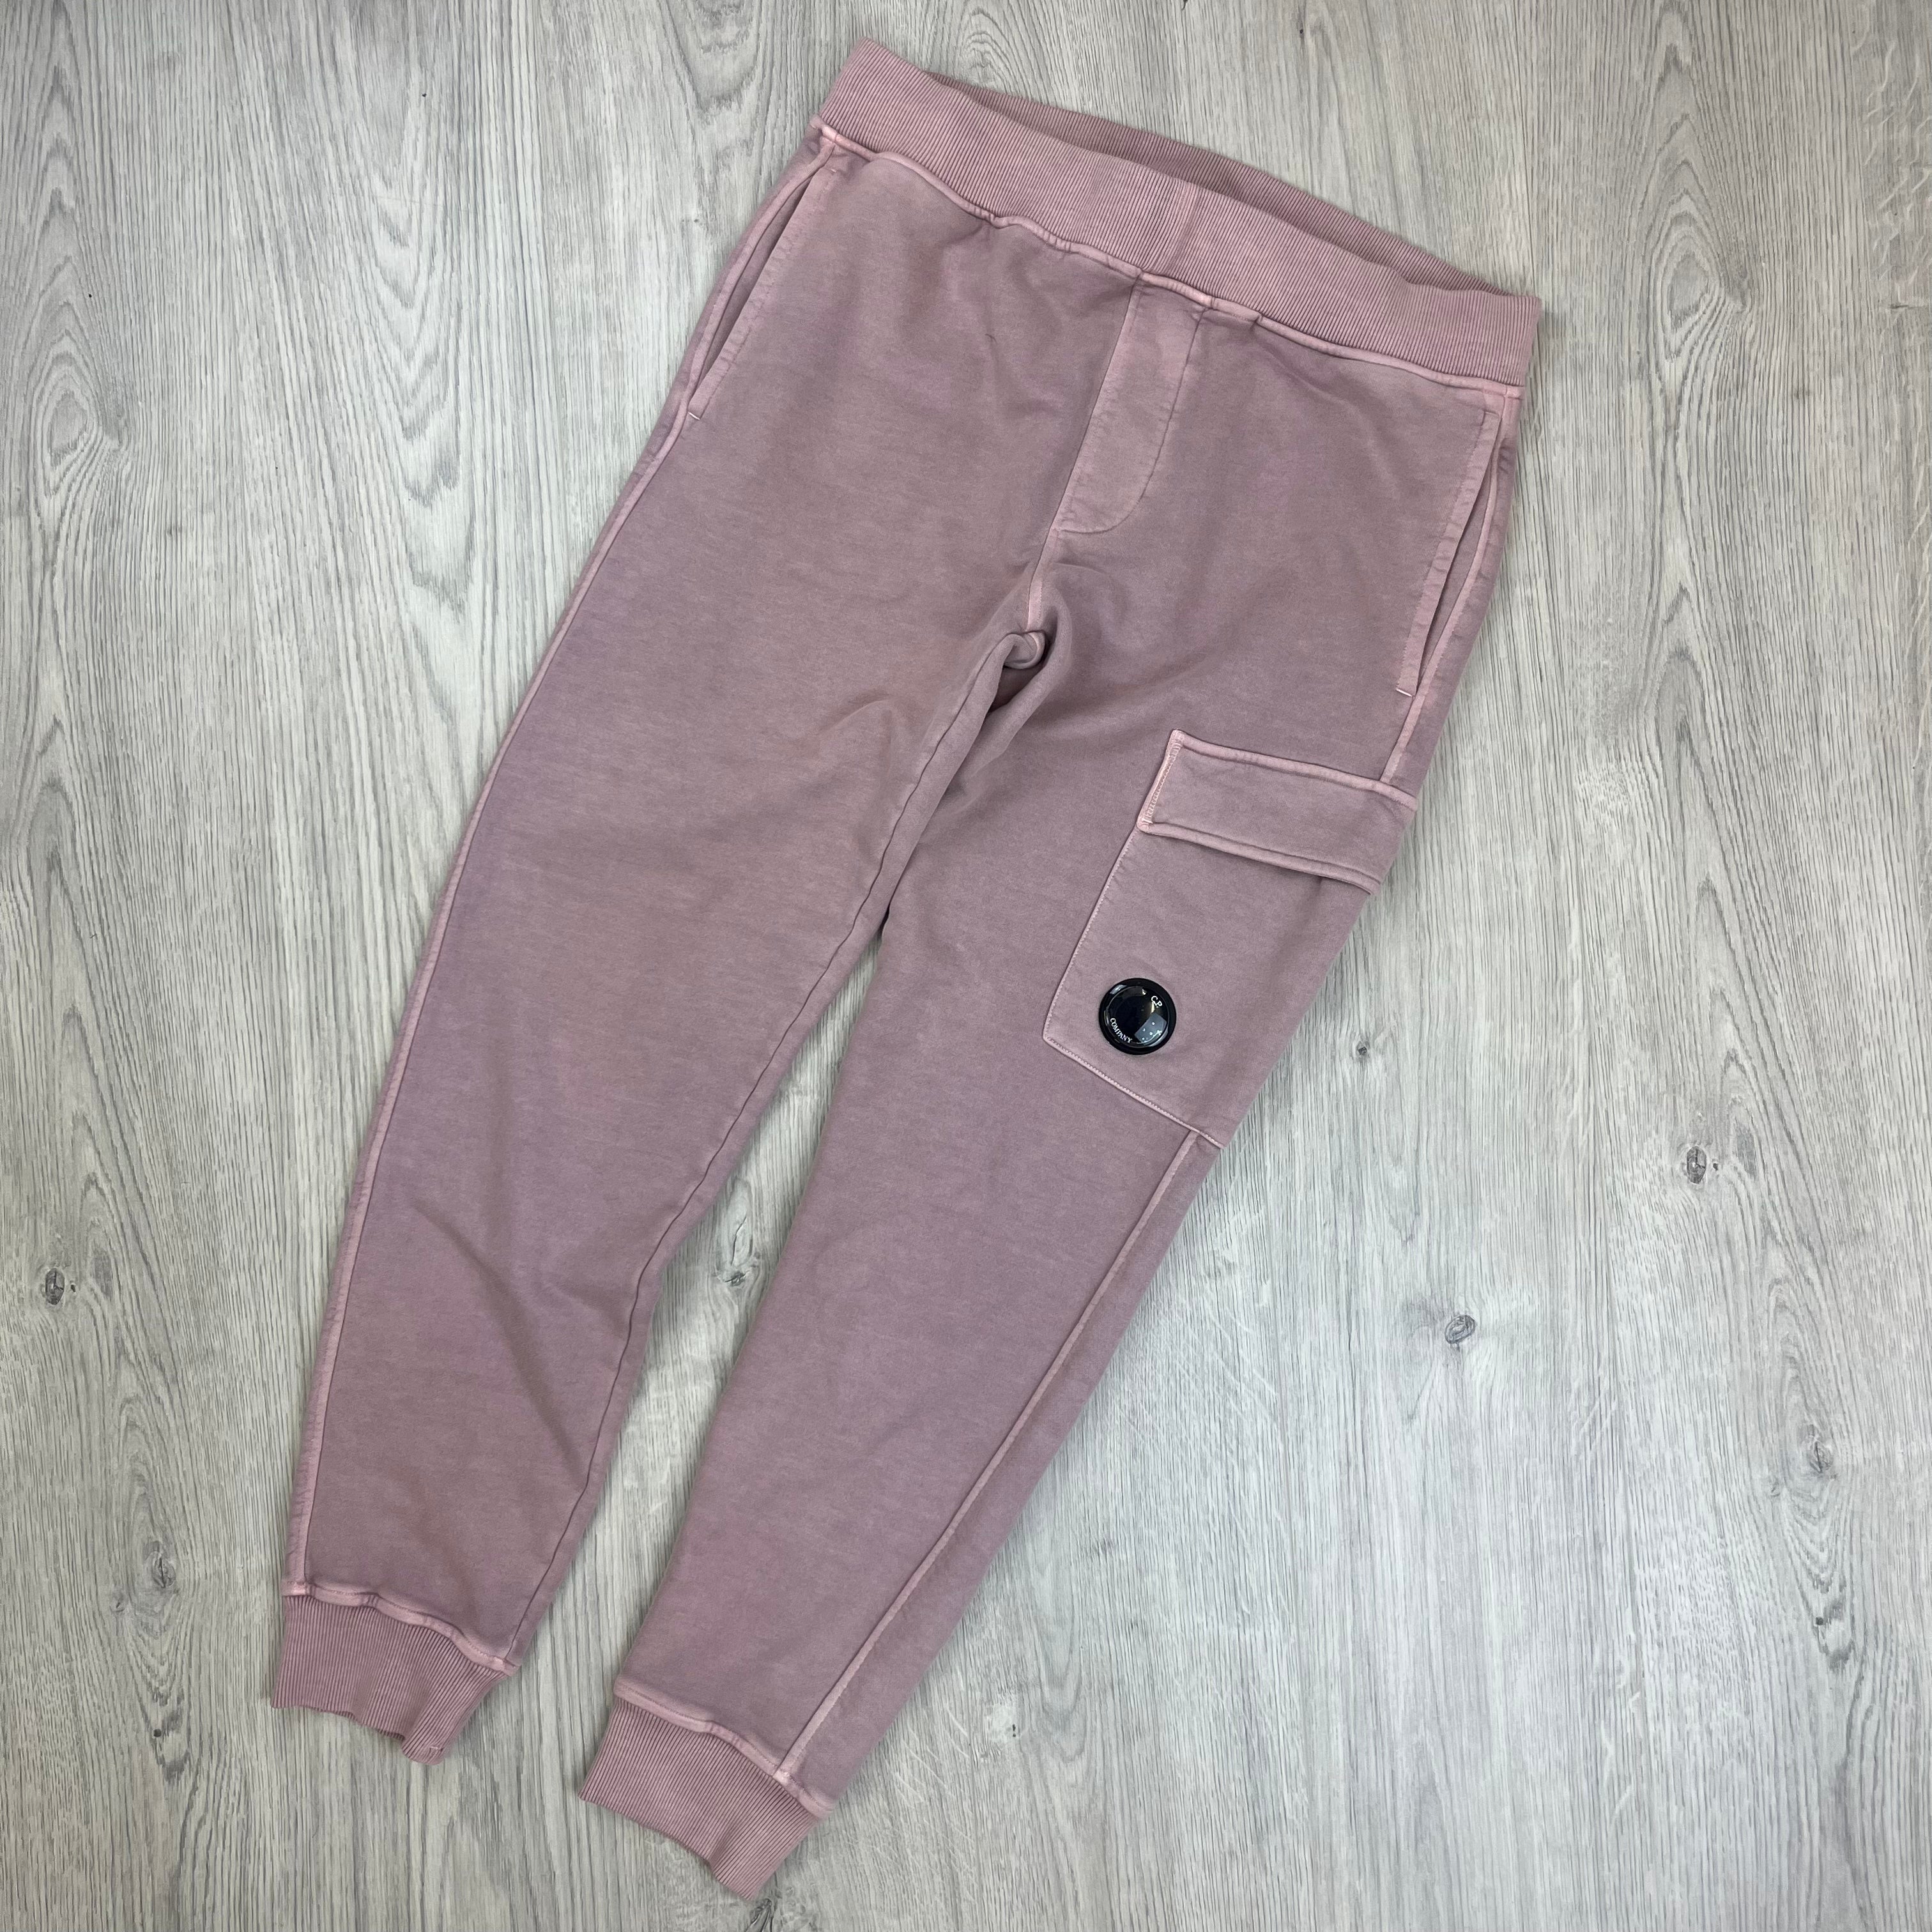 CP Company Dyed Sweatpants